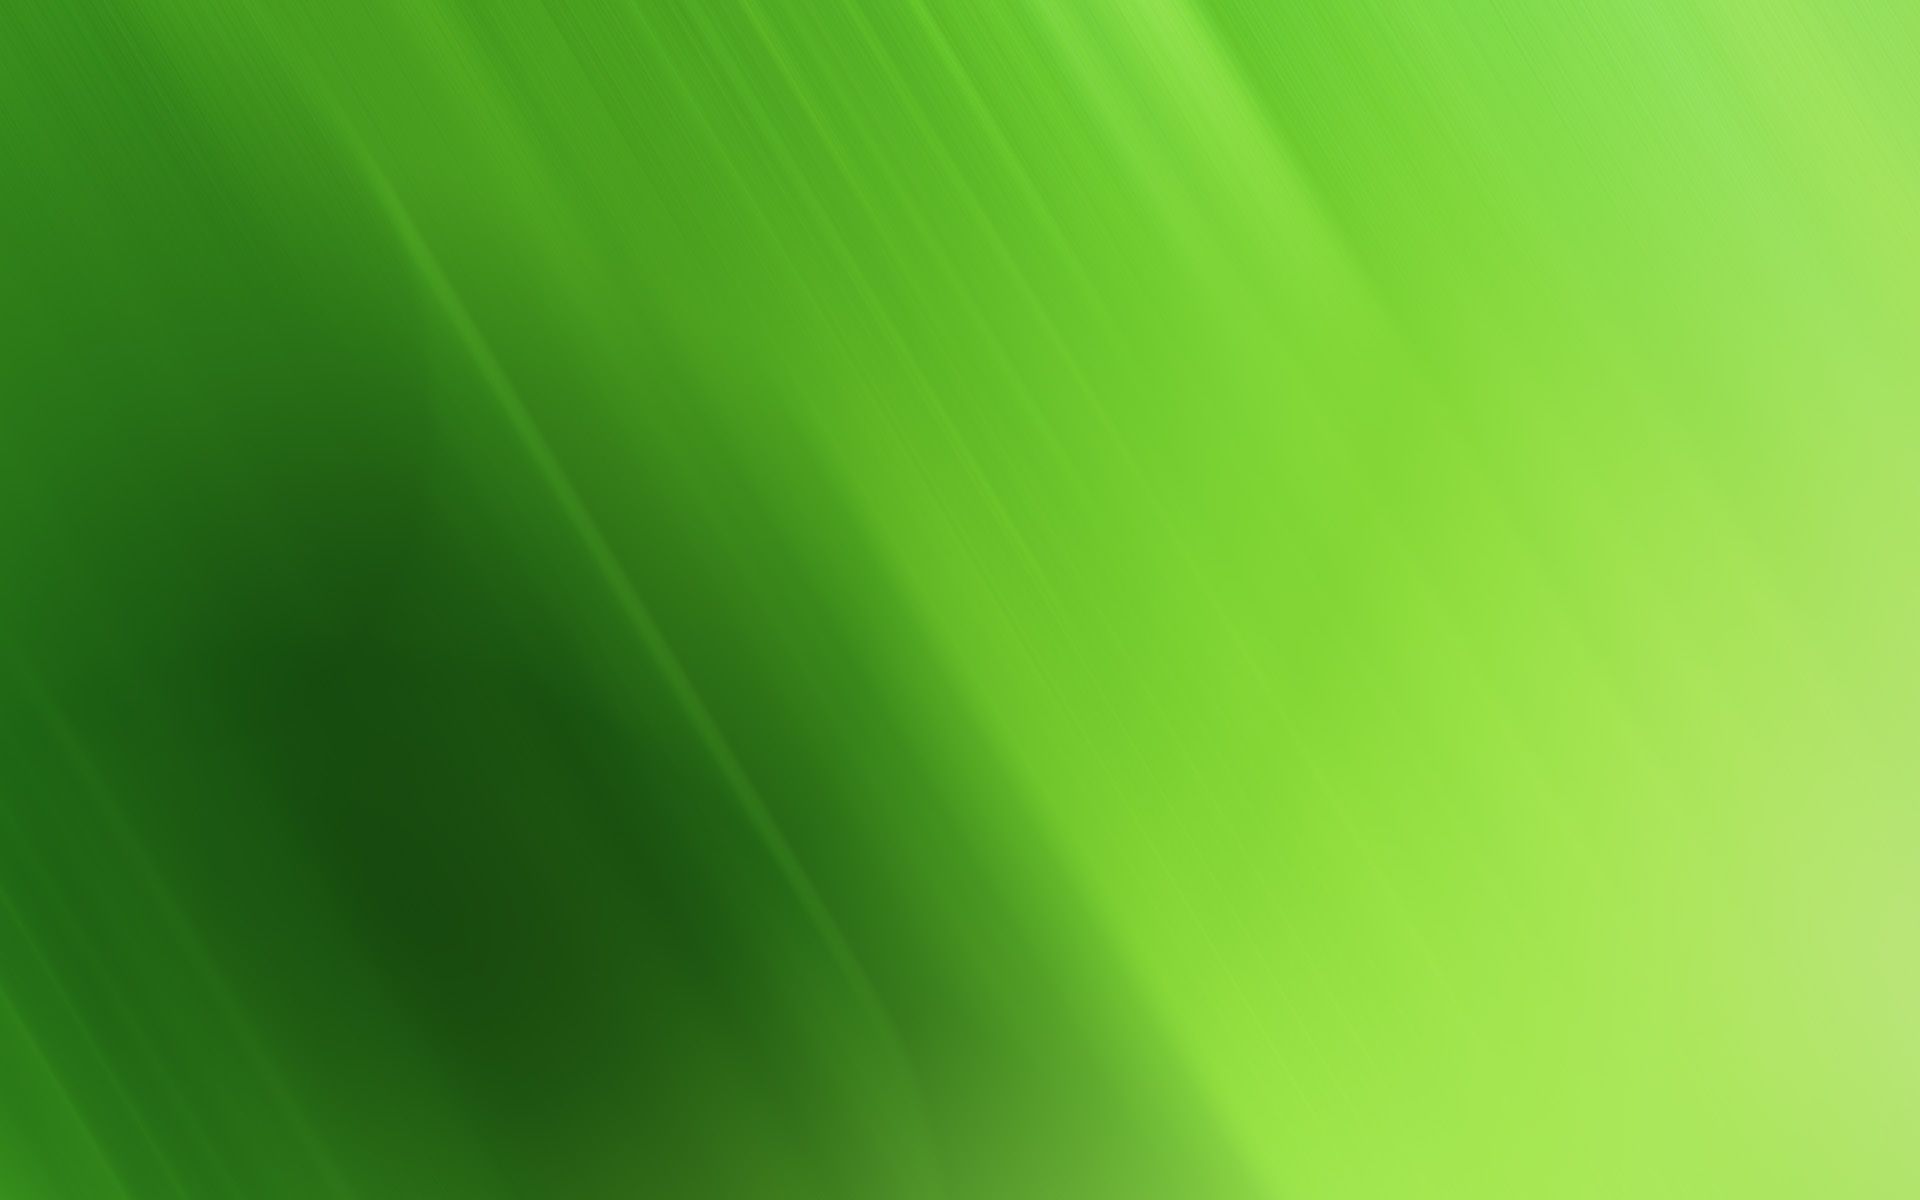 Desktop green abstract clean backgrounds - waughrealty.com